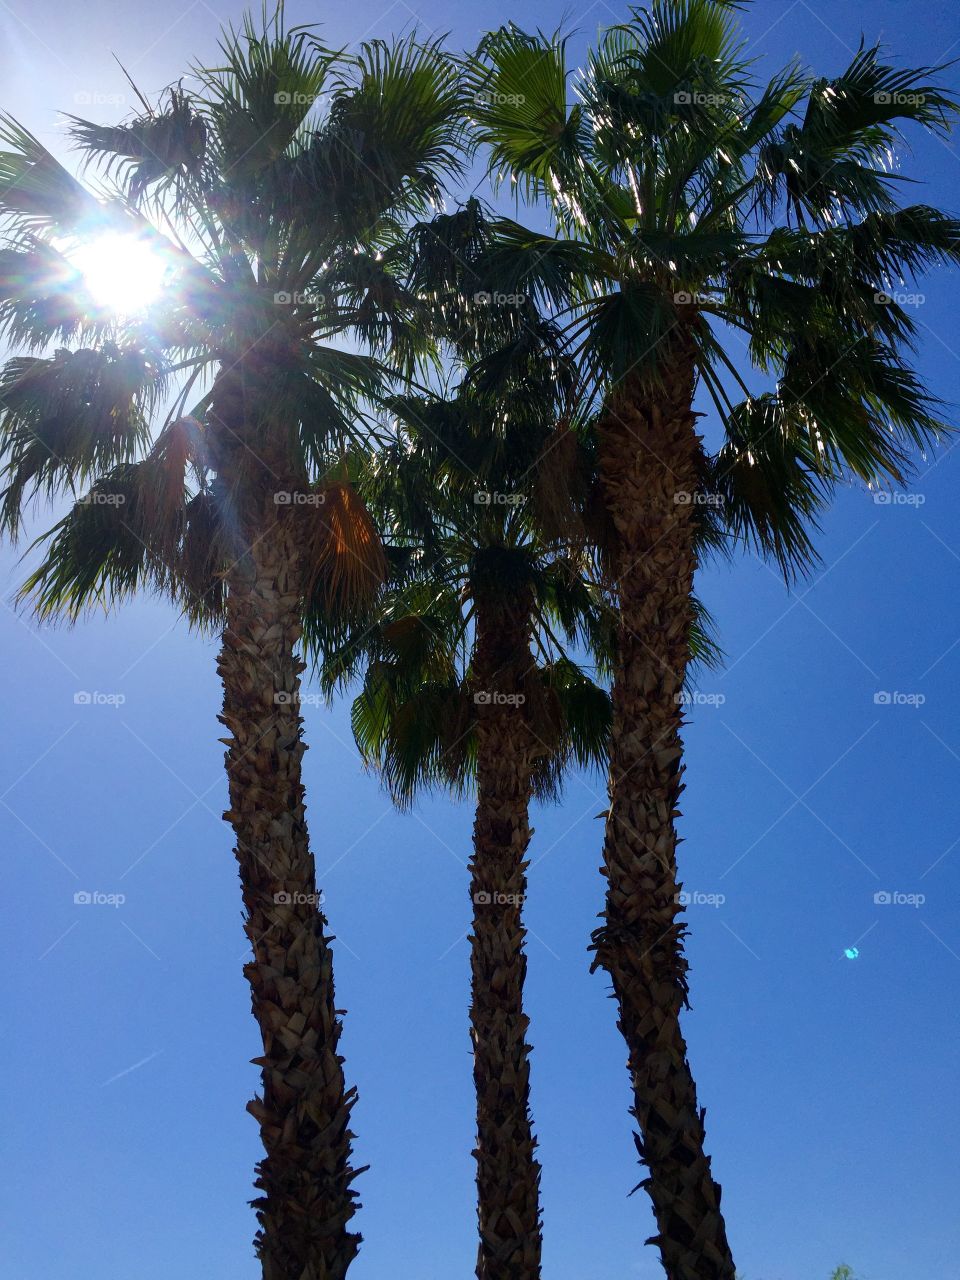 Underneath the palm trees you can leave your worries in California. 